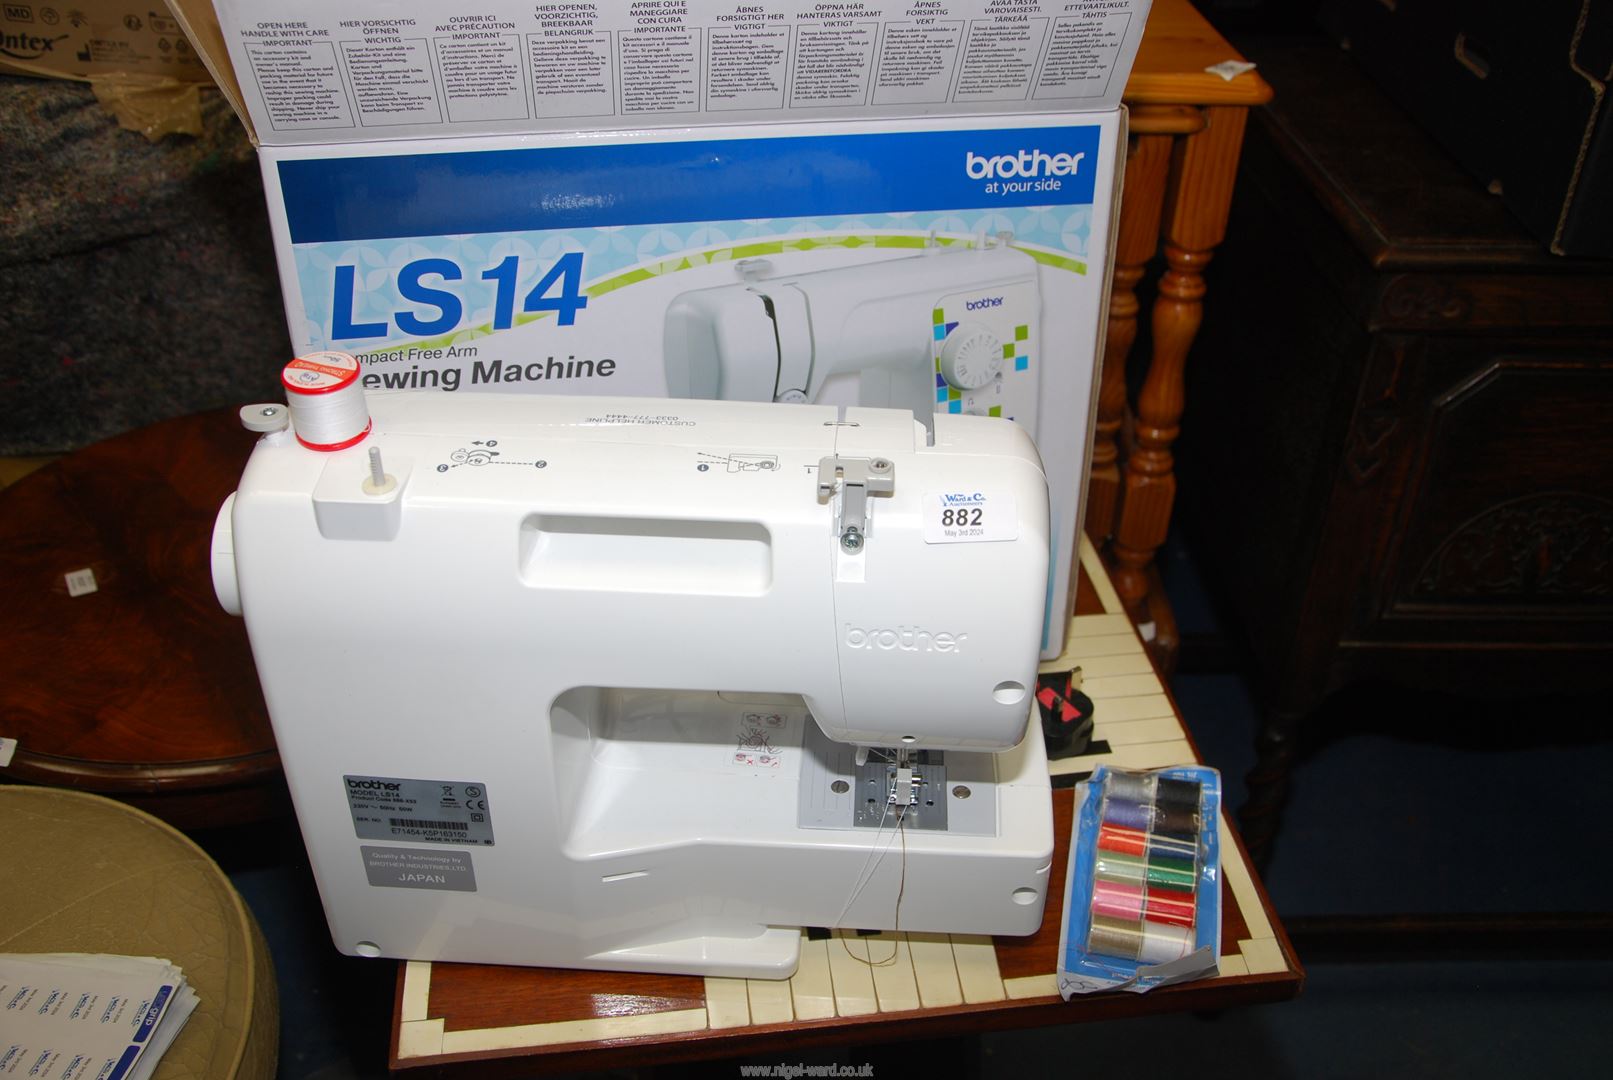 Brother LS14 electric sewing machine.